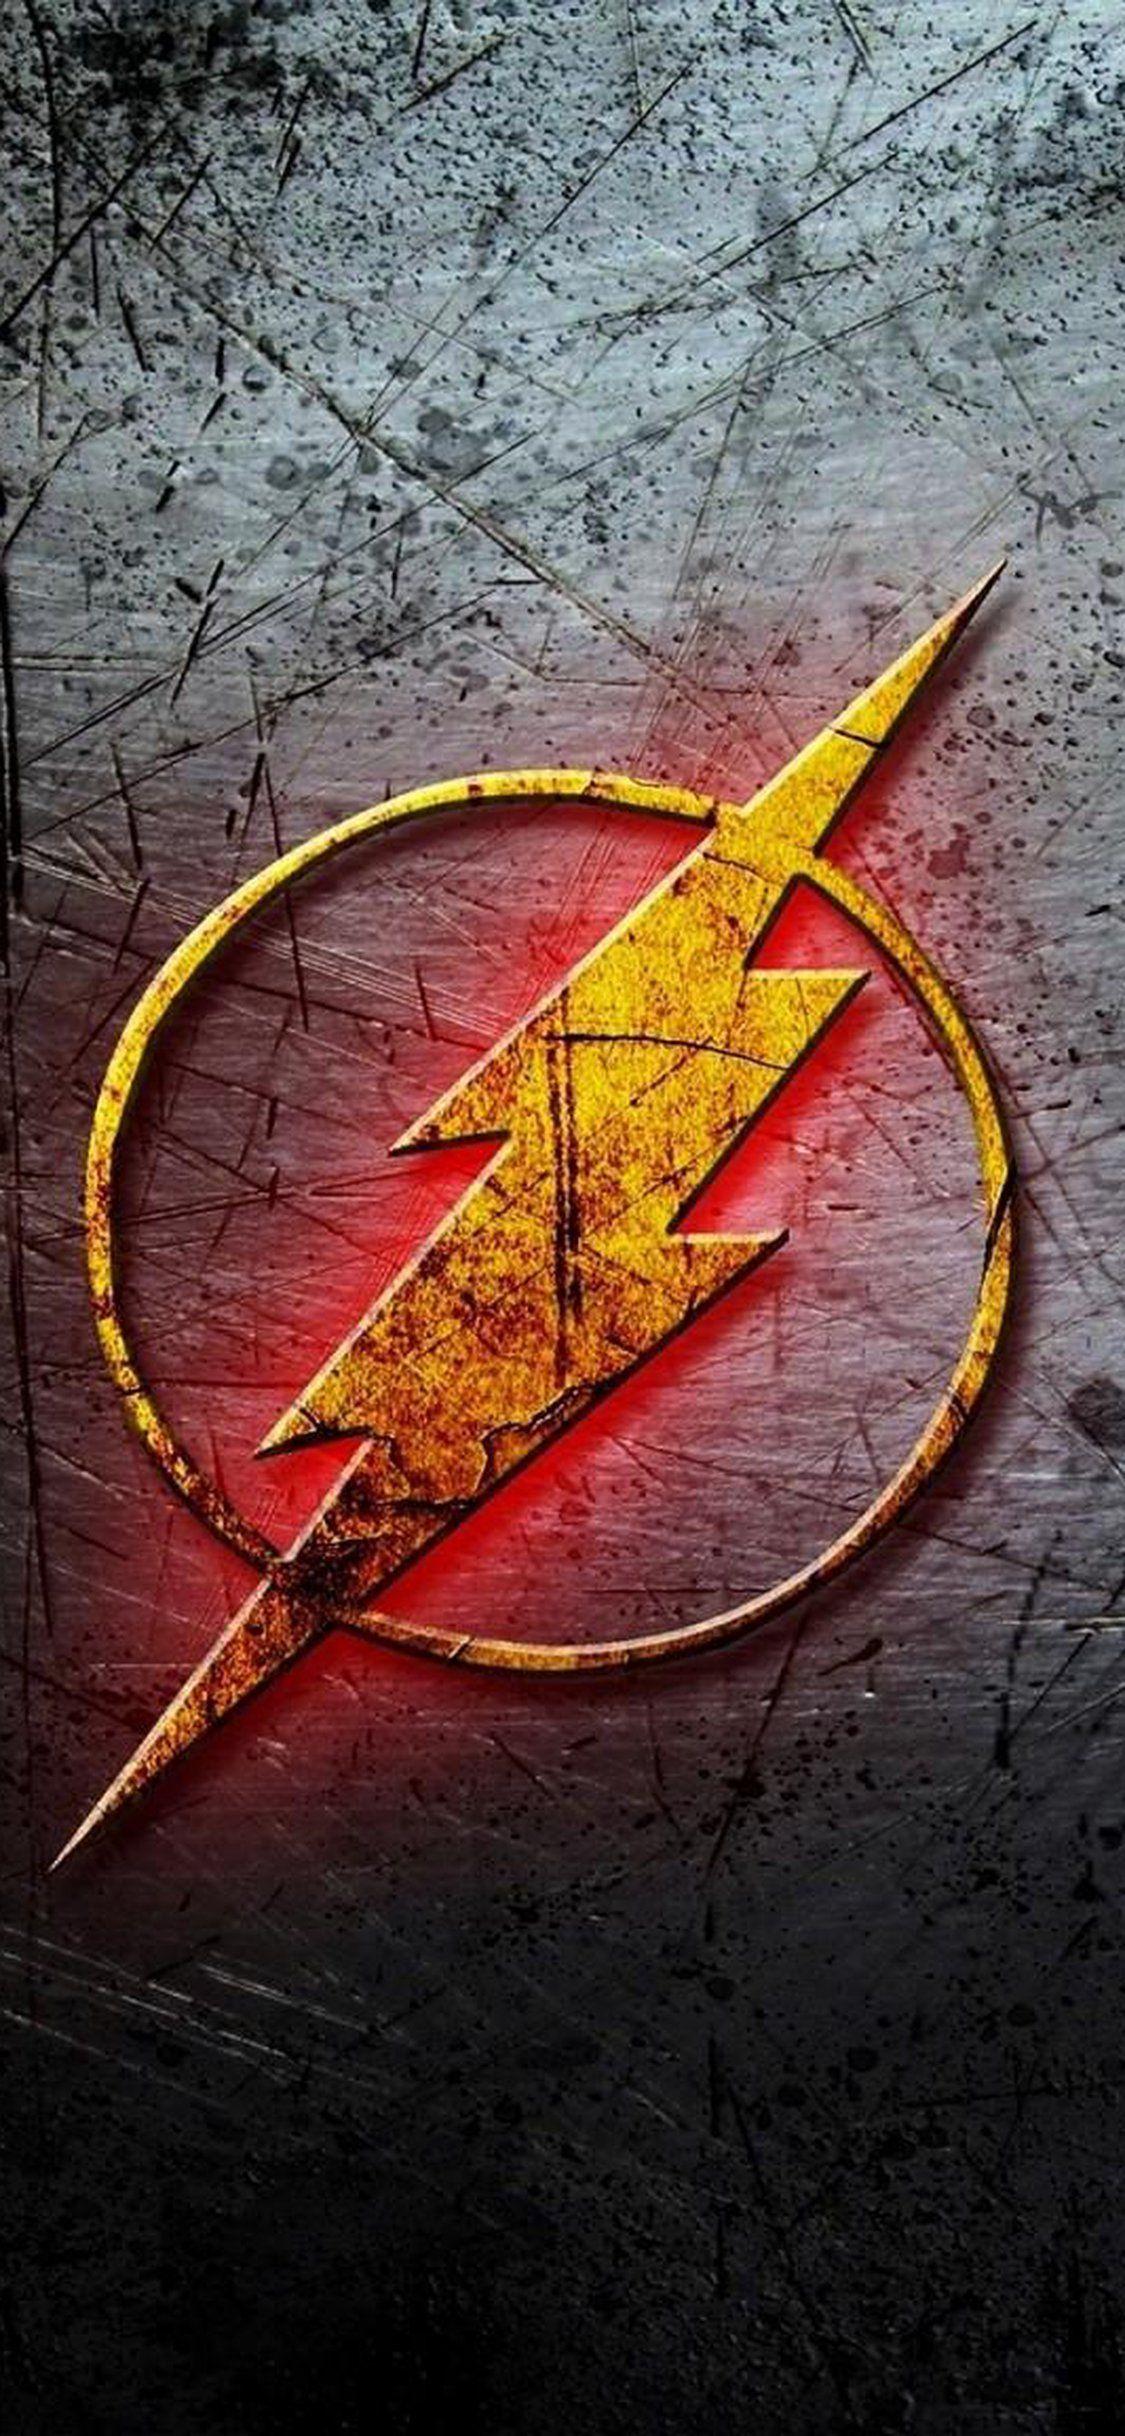 the flash wallpaper iphone